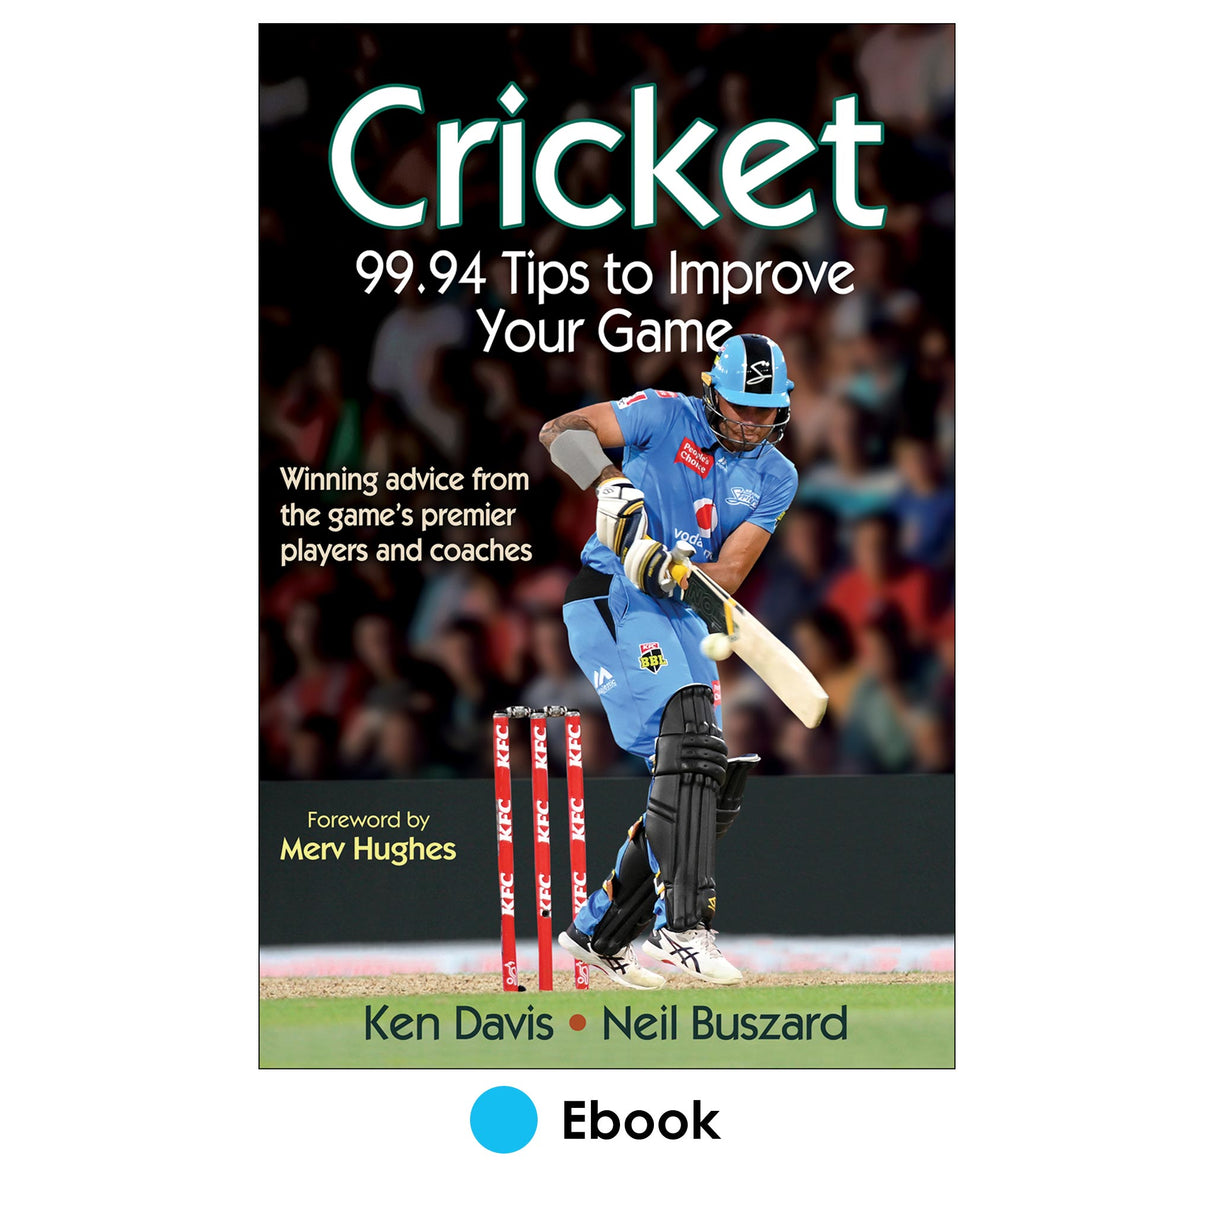 Cricket: 99.94 Tips to Improve Your Game PDF